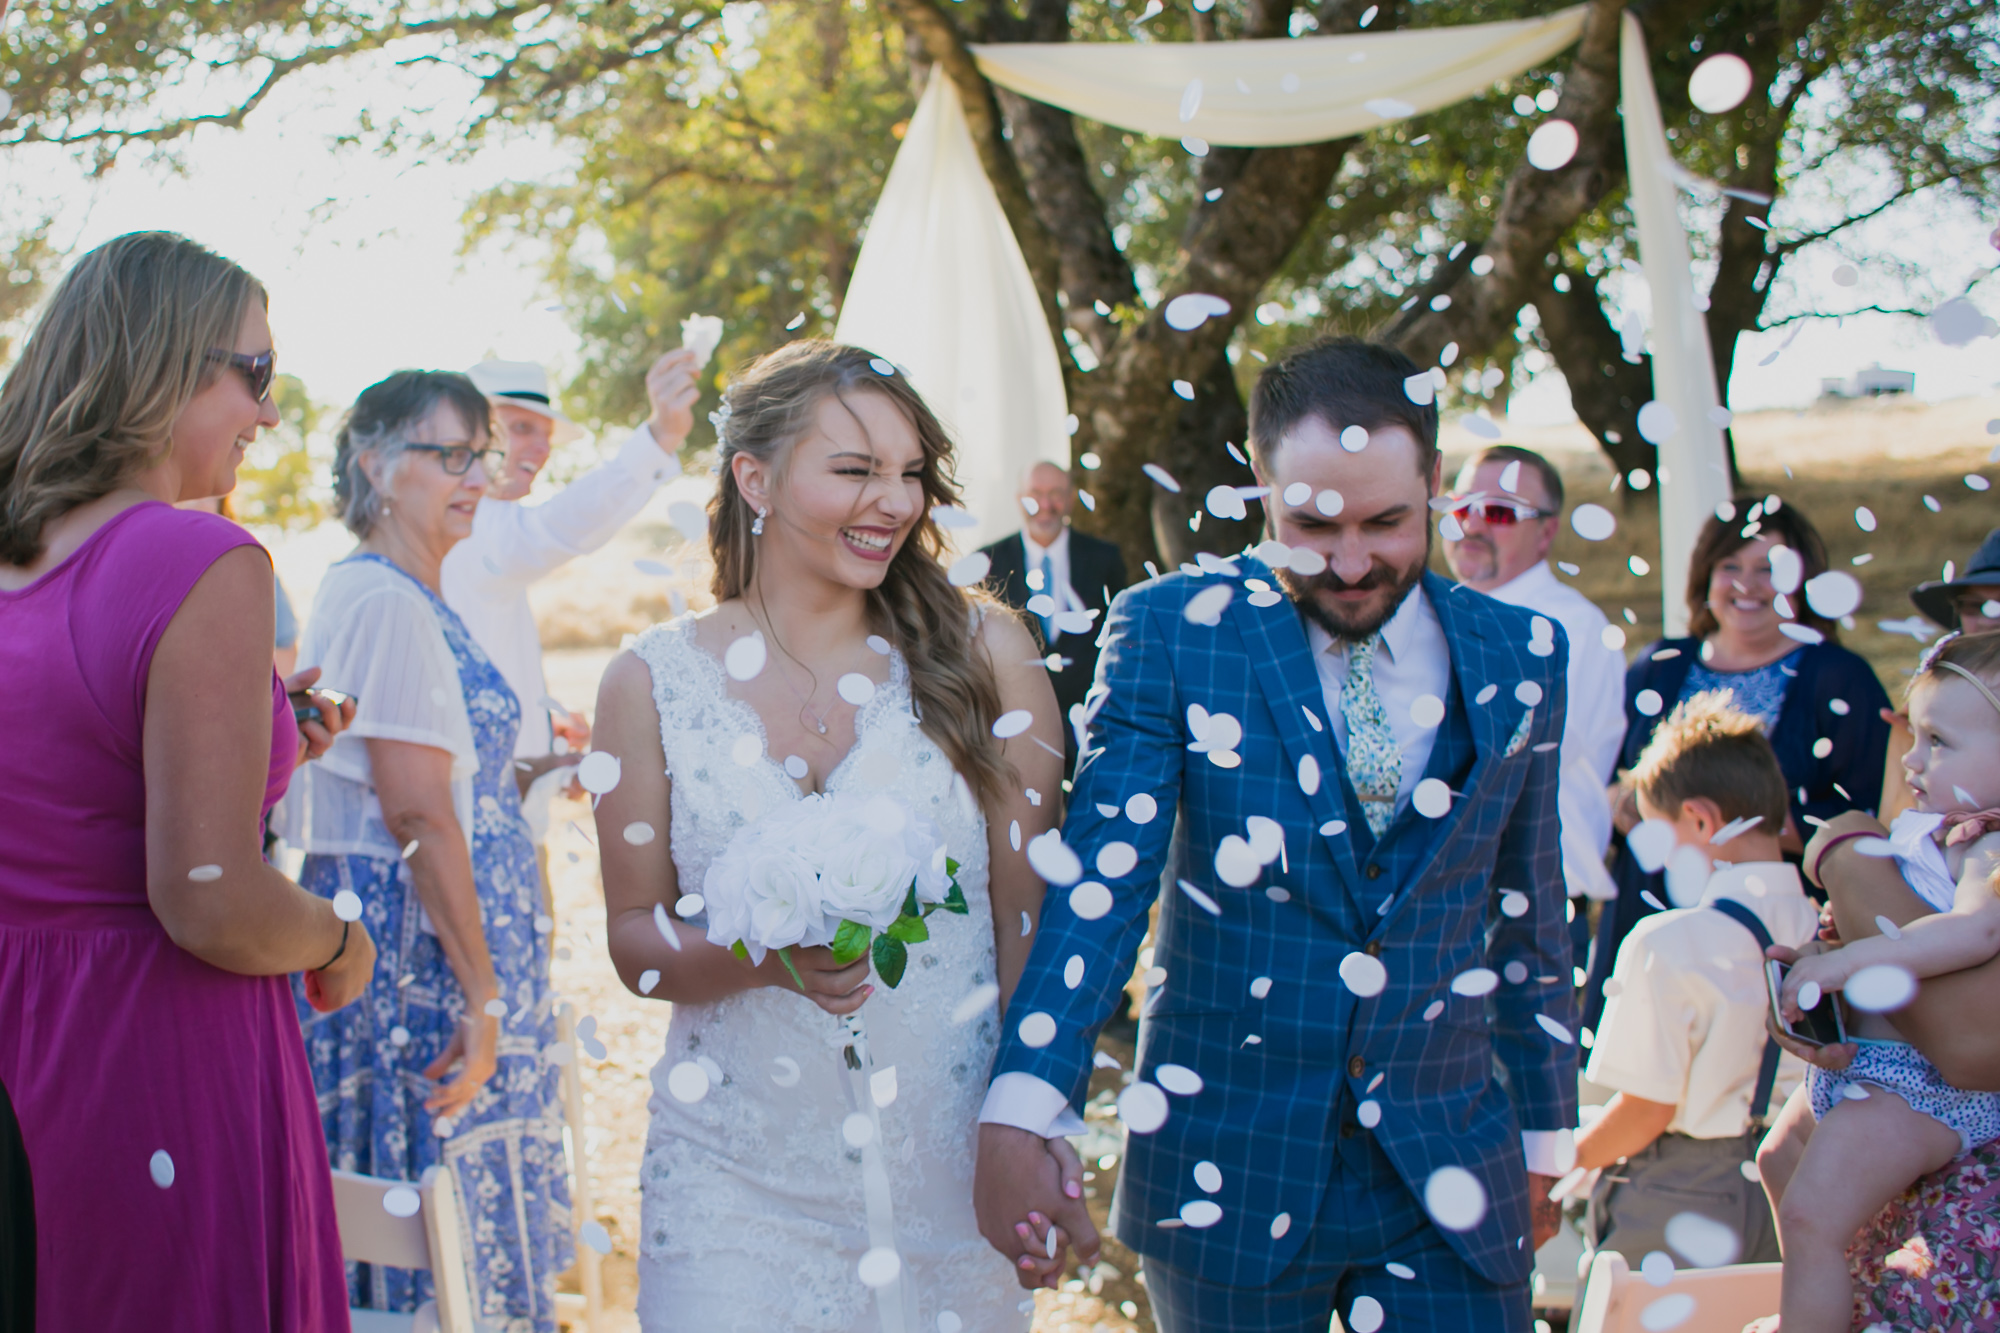 A wedding couple exit their wedding ceremony as people throw confetti along the pathway.